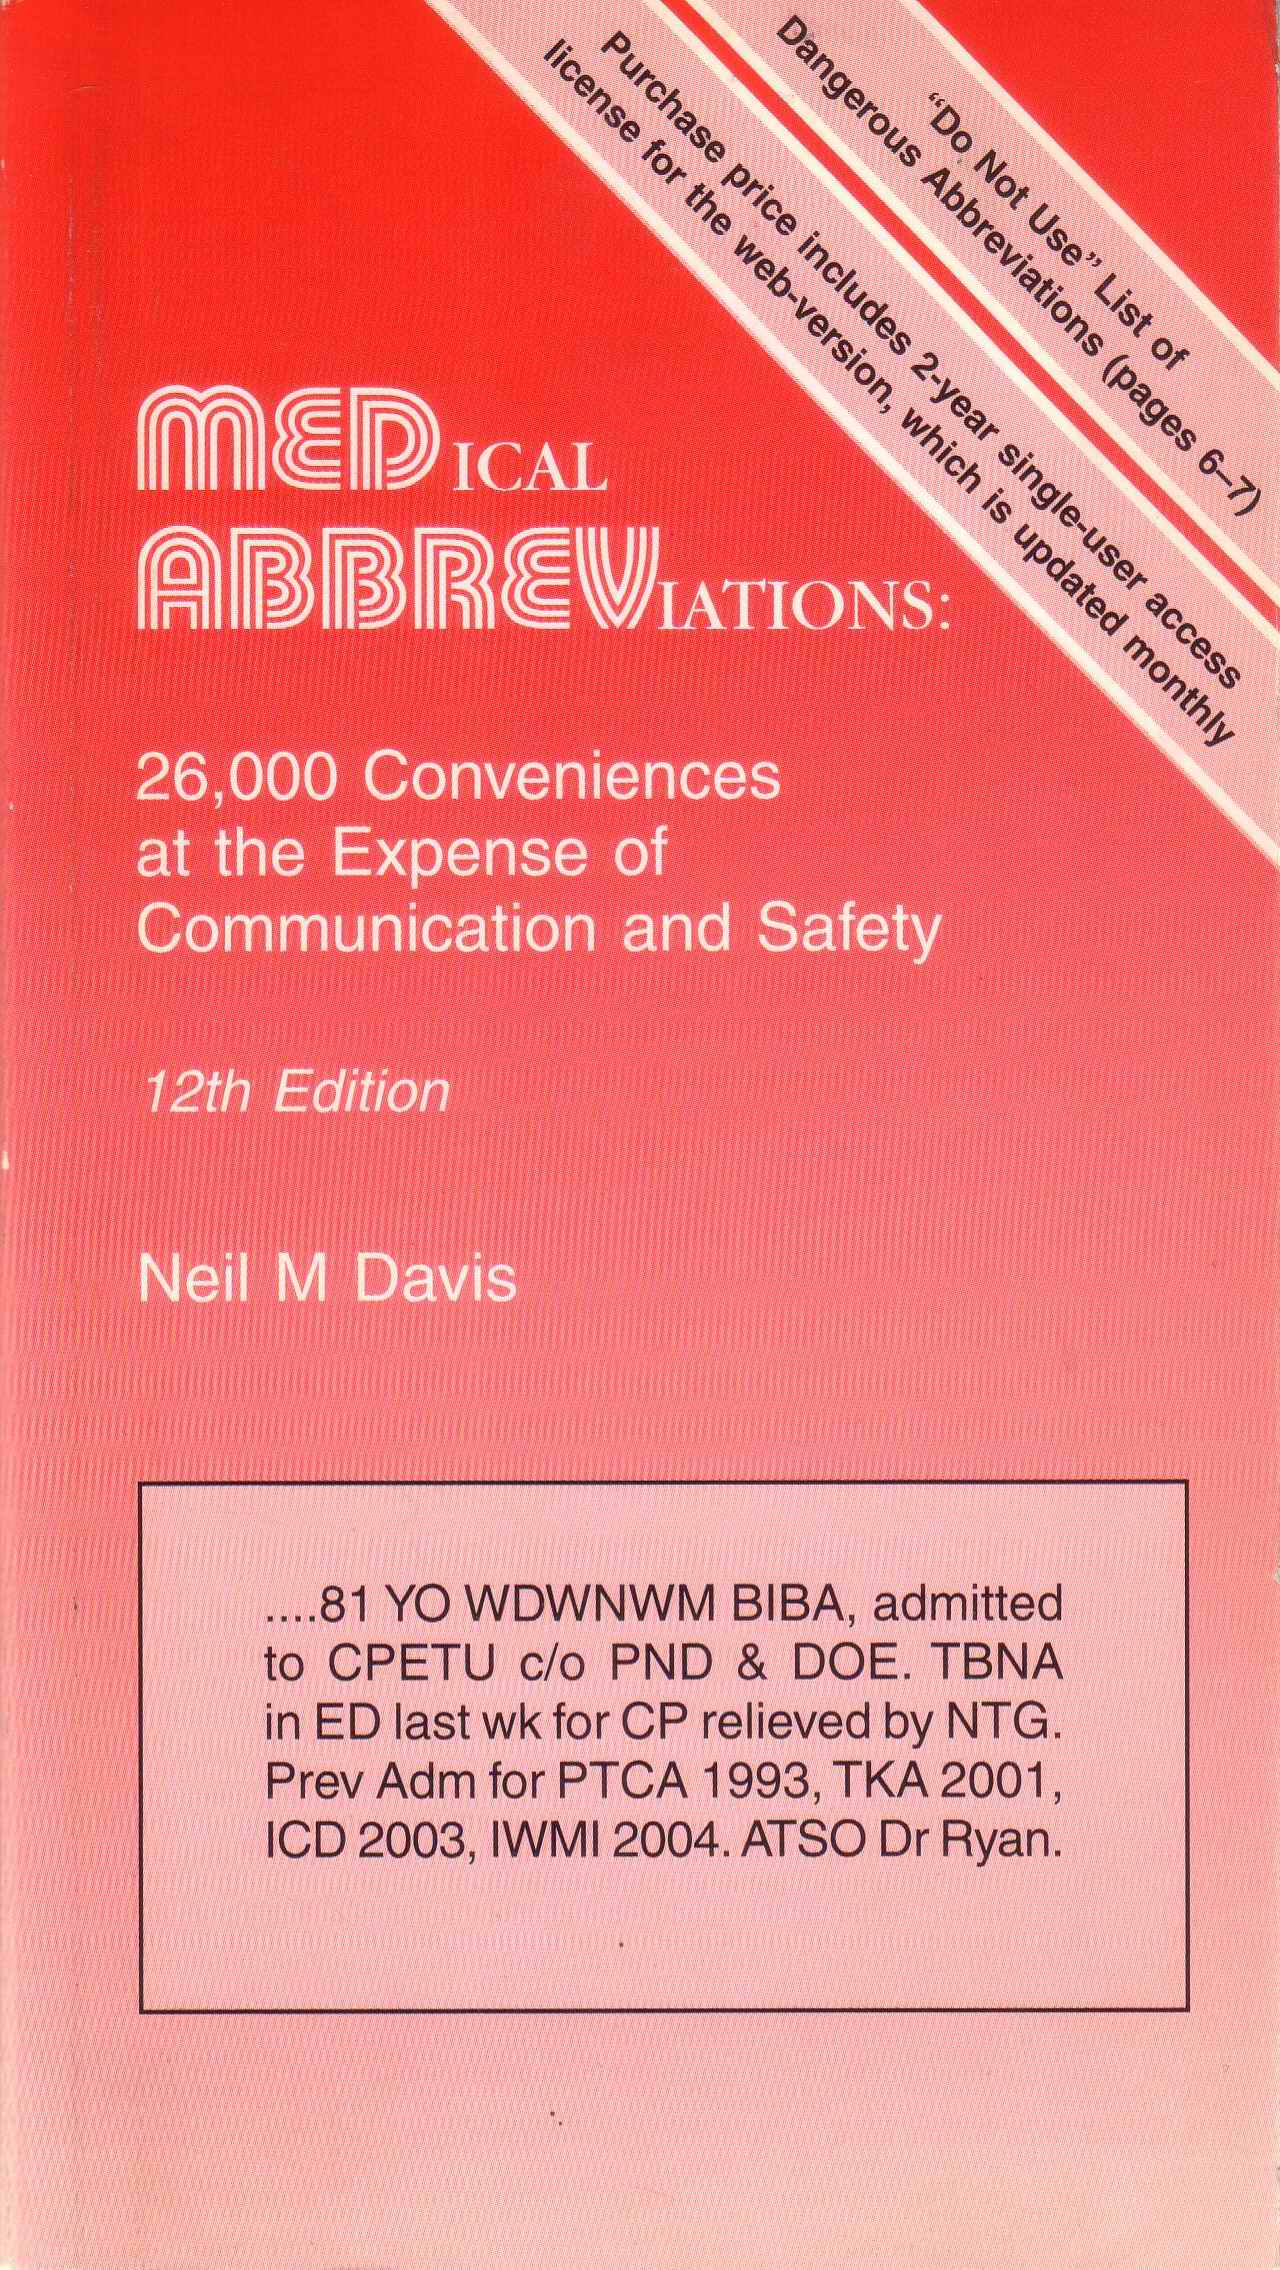 Medical Abbreviations: 26,000 Conveniences at the Expense of Communications and Safety by Neil M Davis